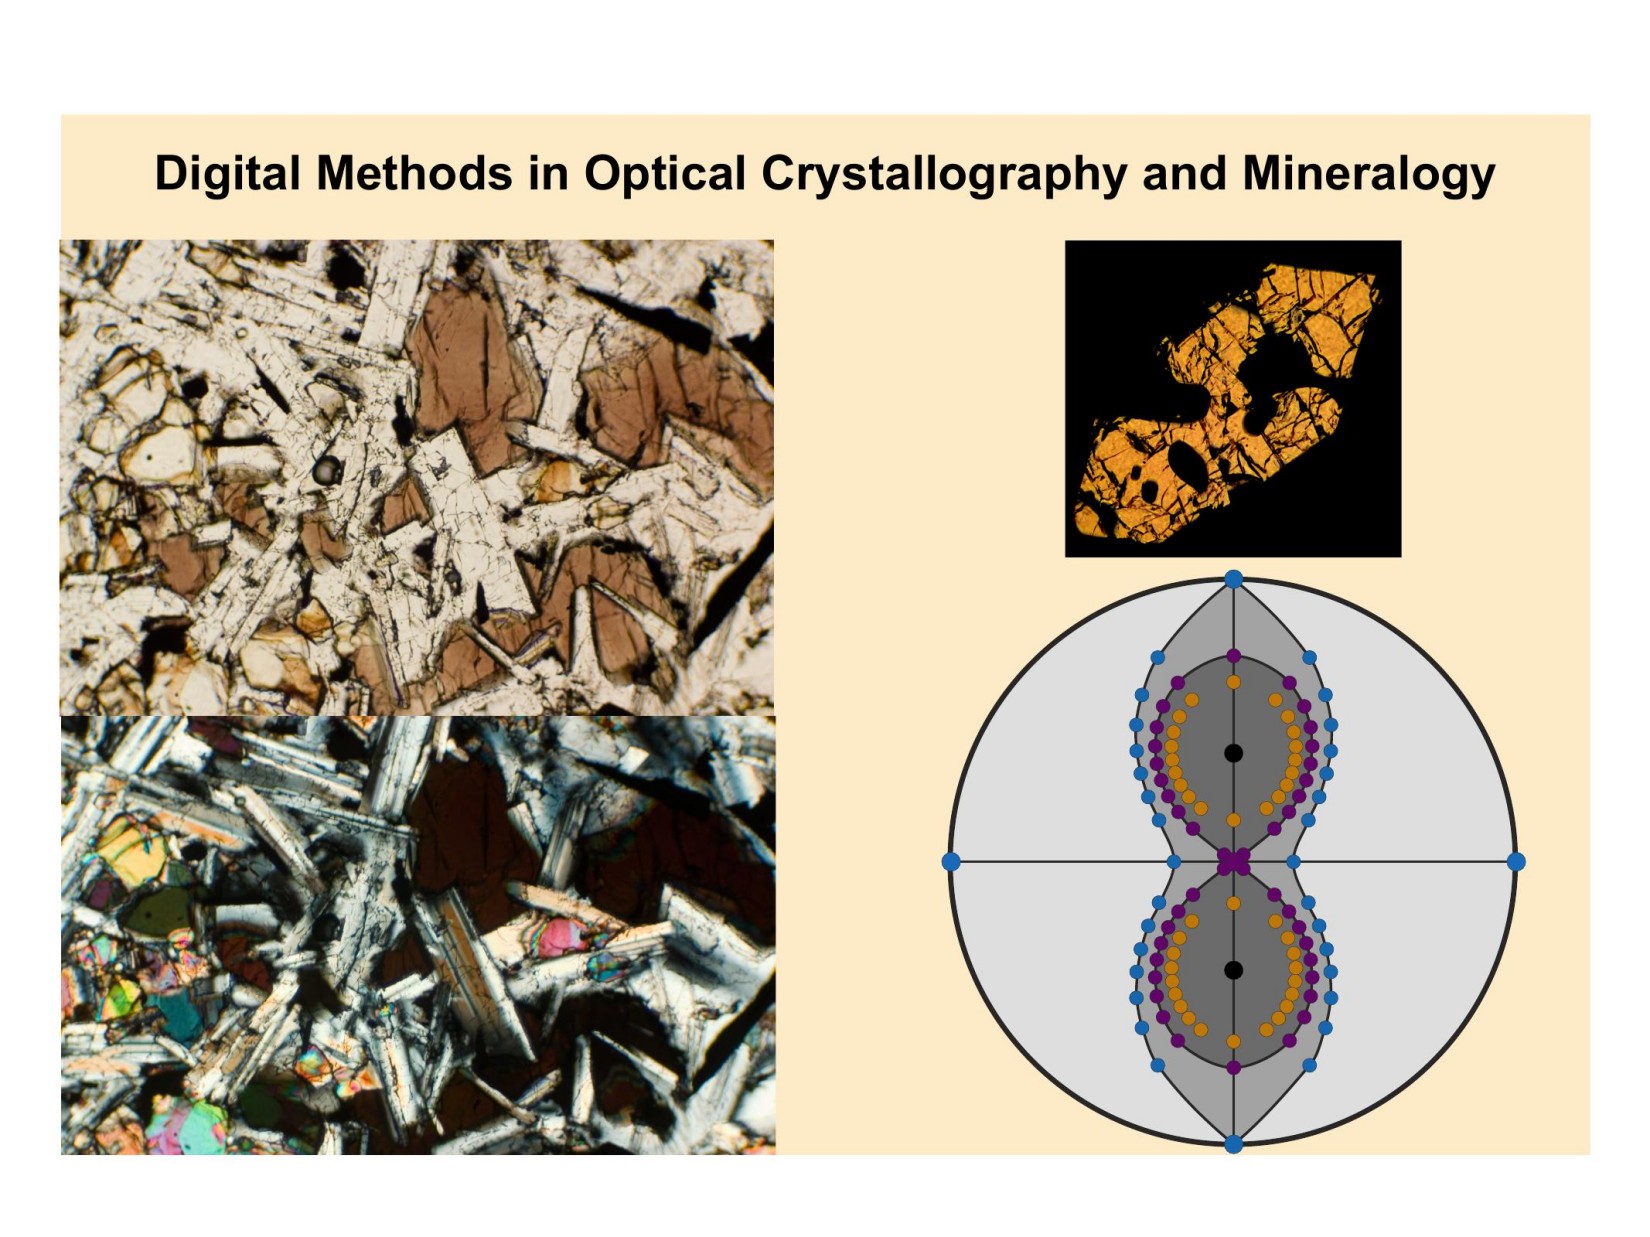 Digital Methods in Optical Crystallography and Mineralogy